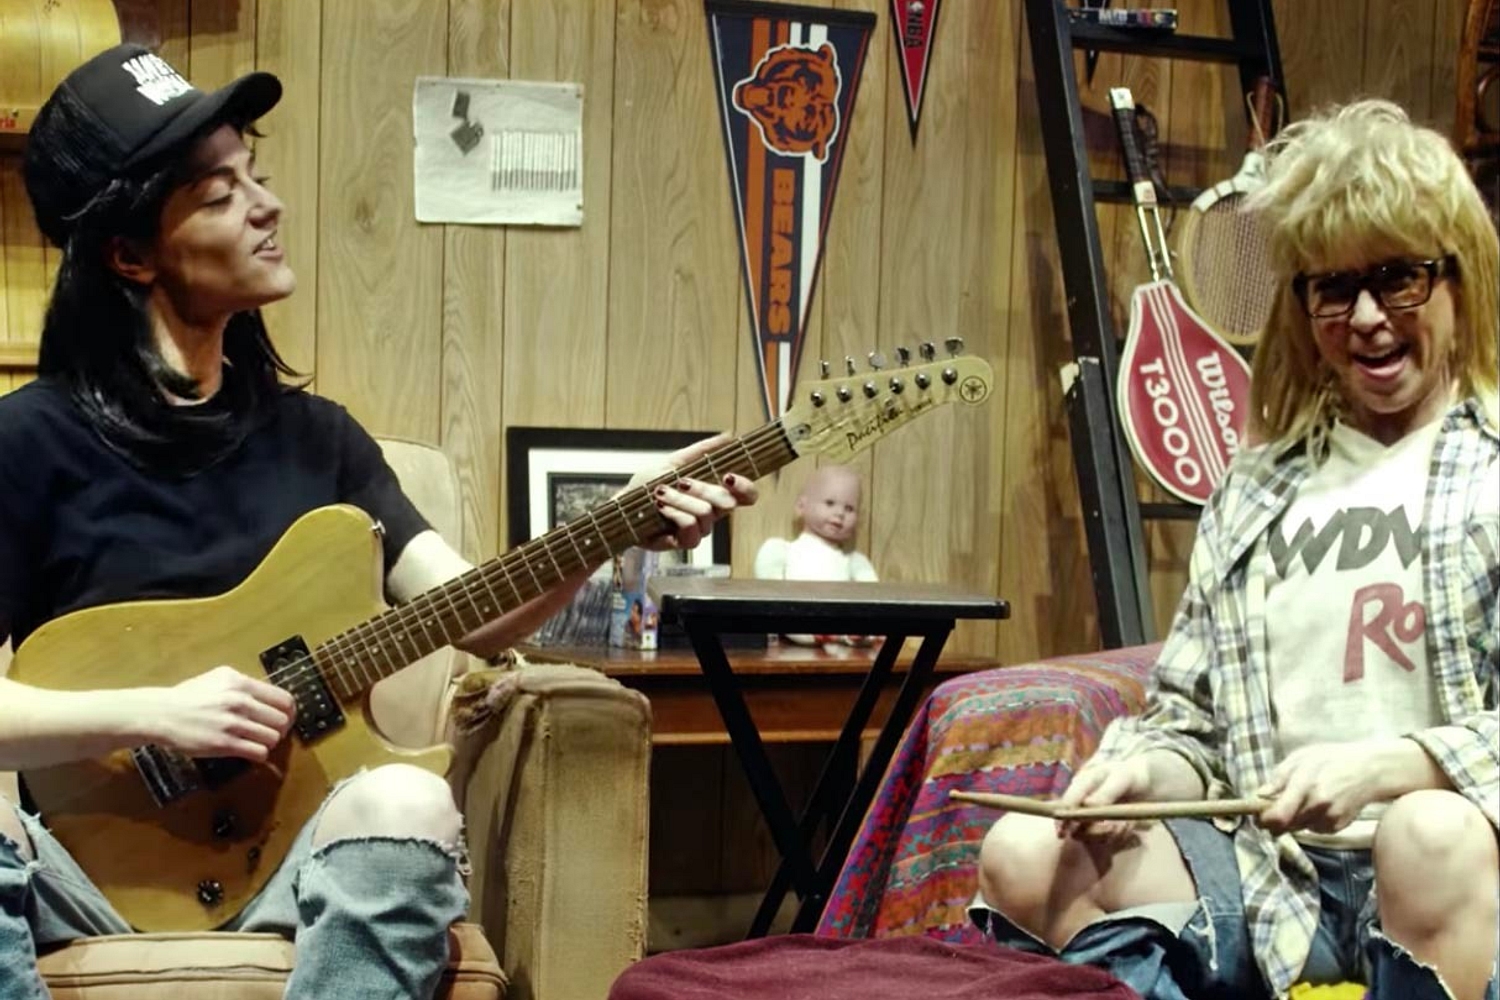 Laura Jane Grace and the Devouring Mothers turn Wayne’s World in video for ‘I Hate Chicago’